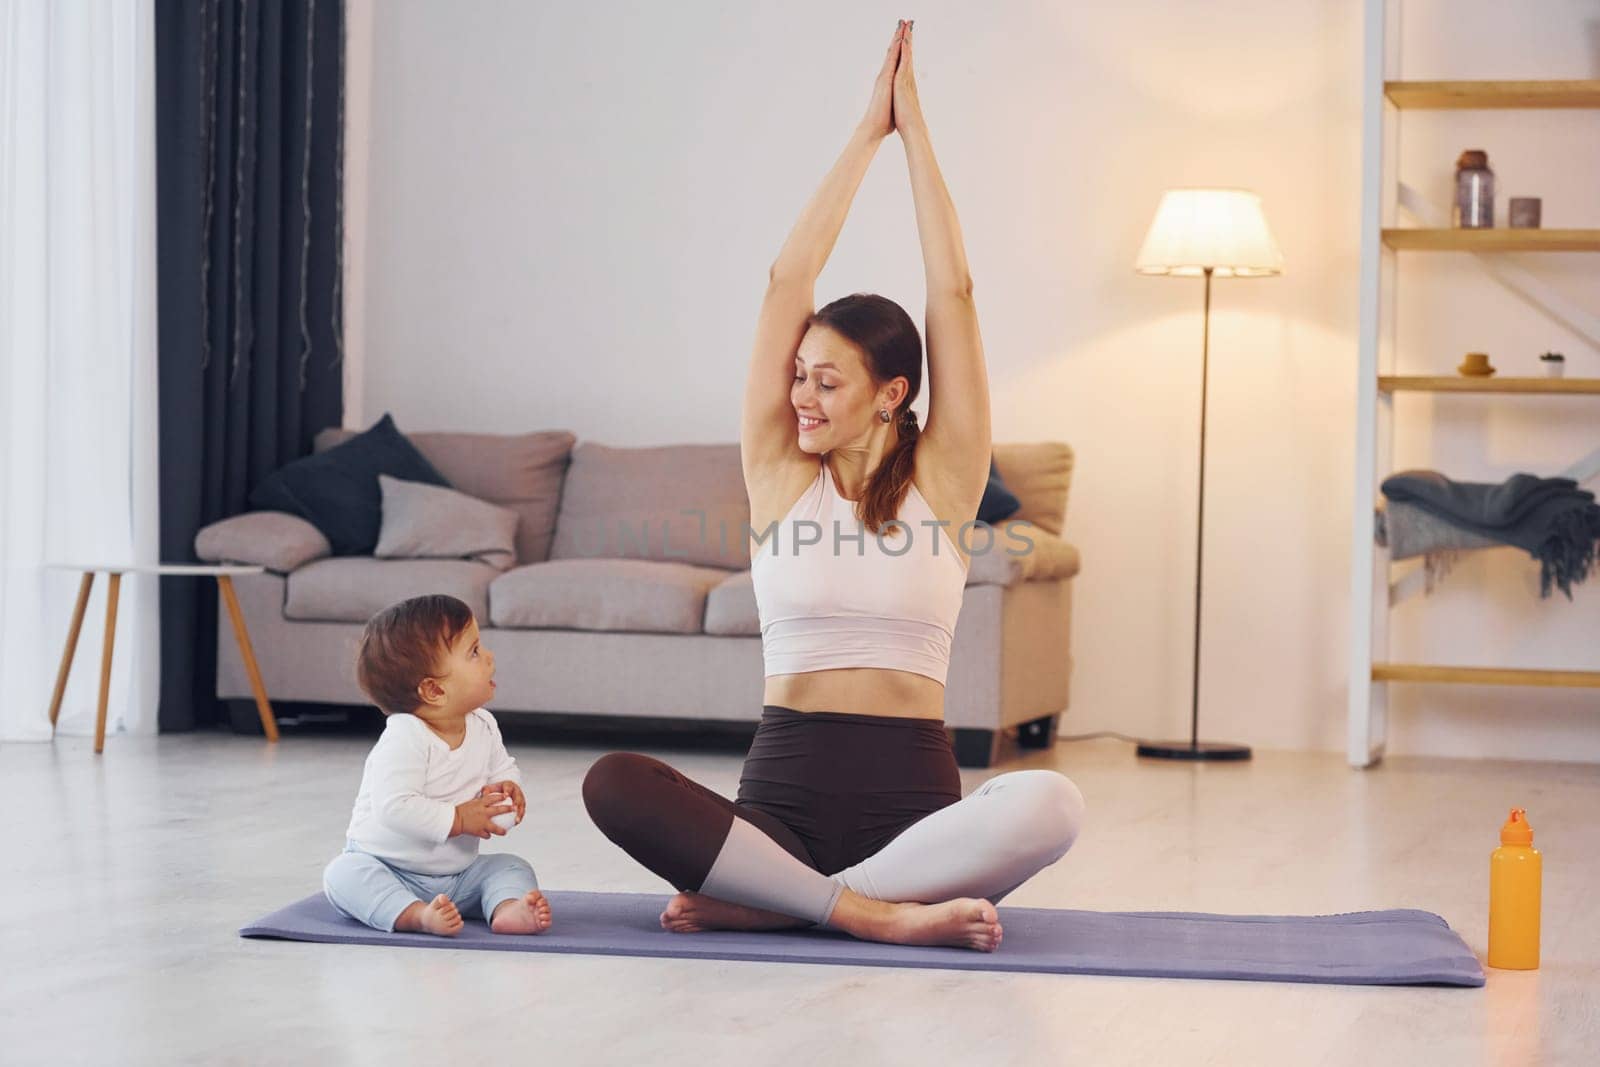 Practicing yoga. Mother with her little daughter is at home together.